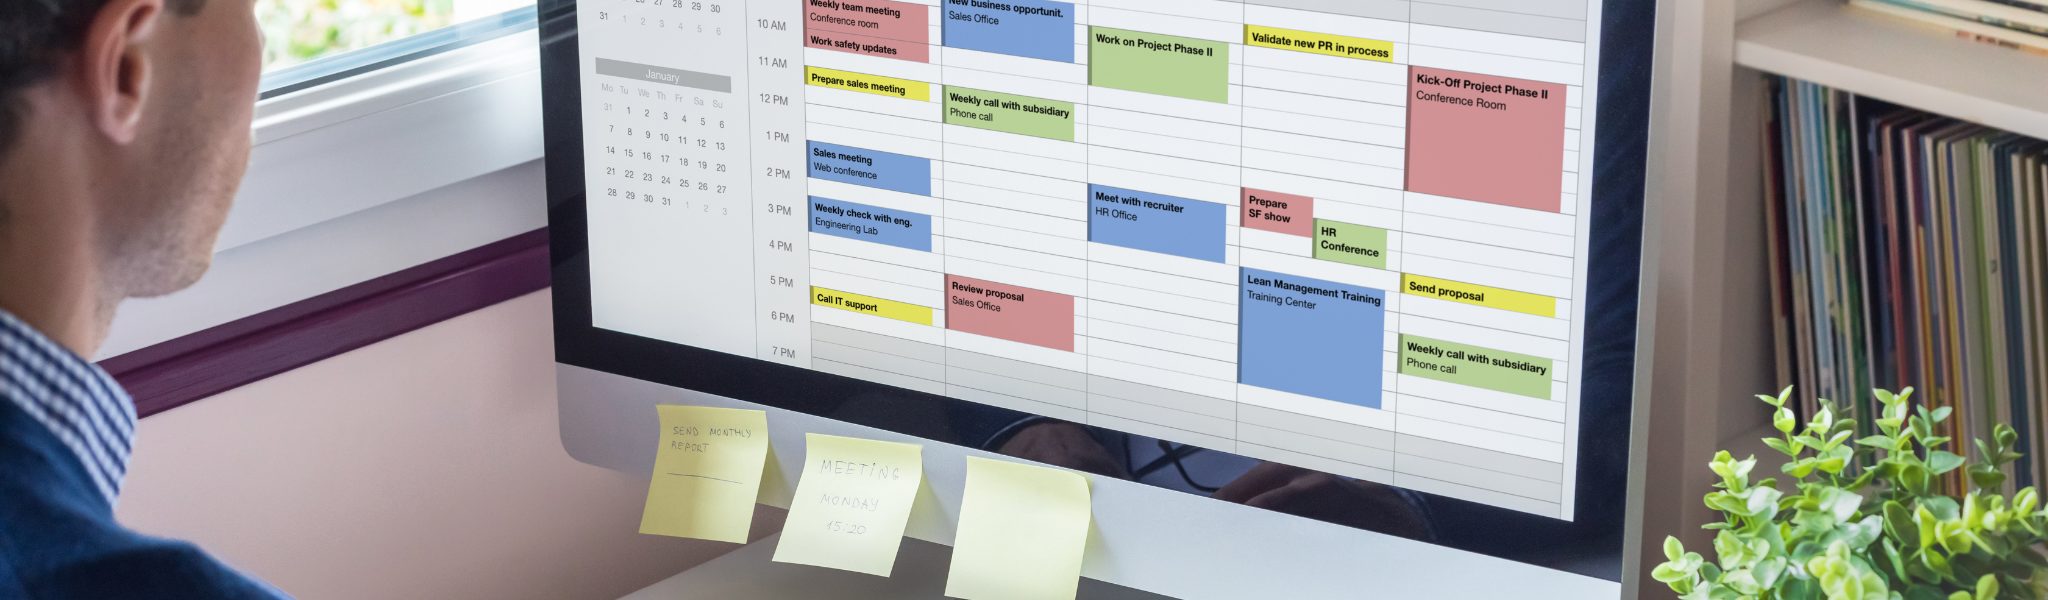 How to Prioritize Your CRM Projects